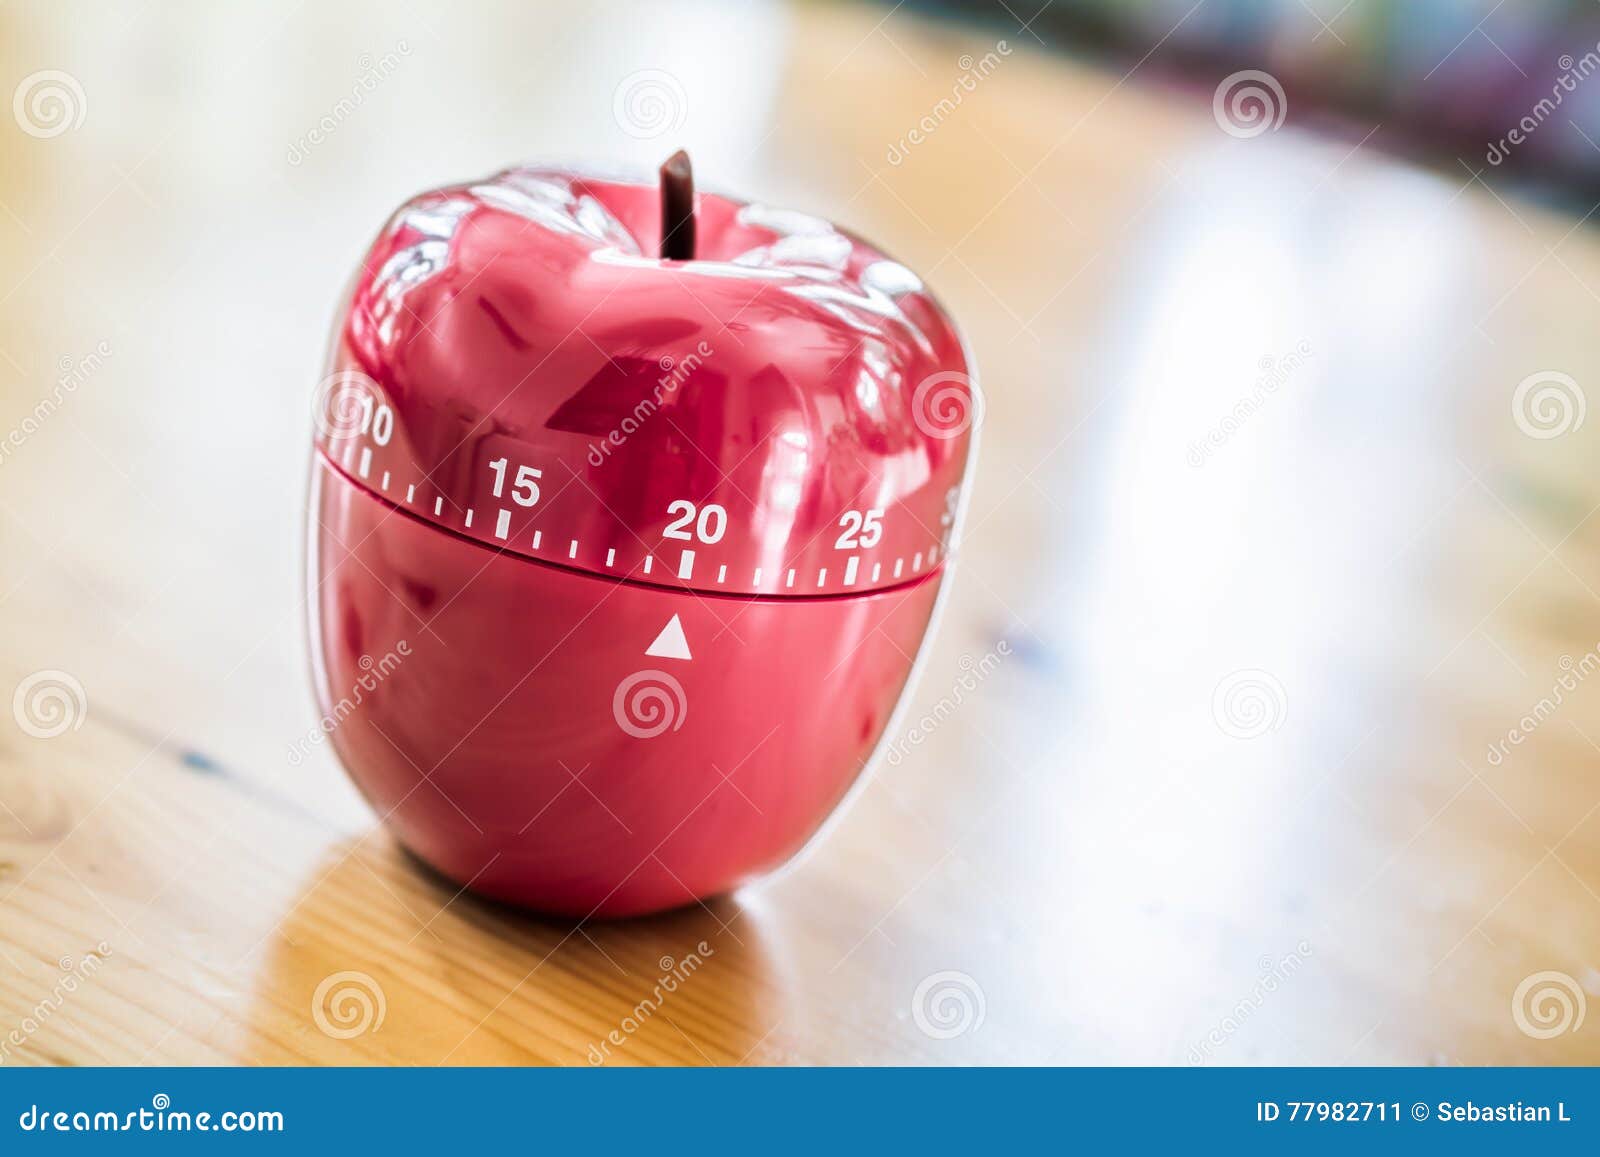 20 Minutes - Kitchen Egg Timer in Apple on Wooden Table Stock Image - Image of clock, kitchen: 77982711